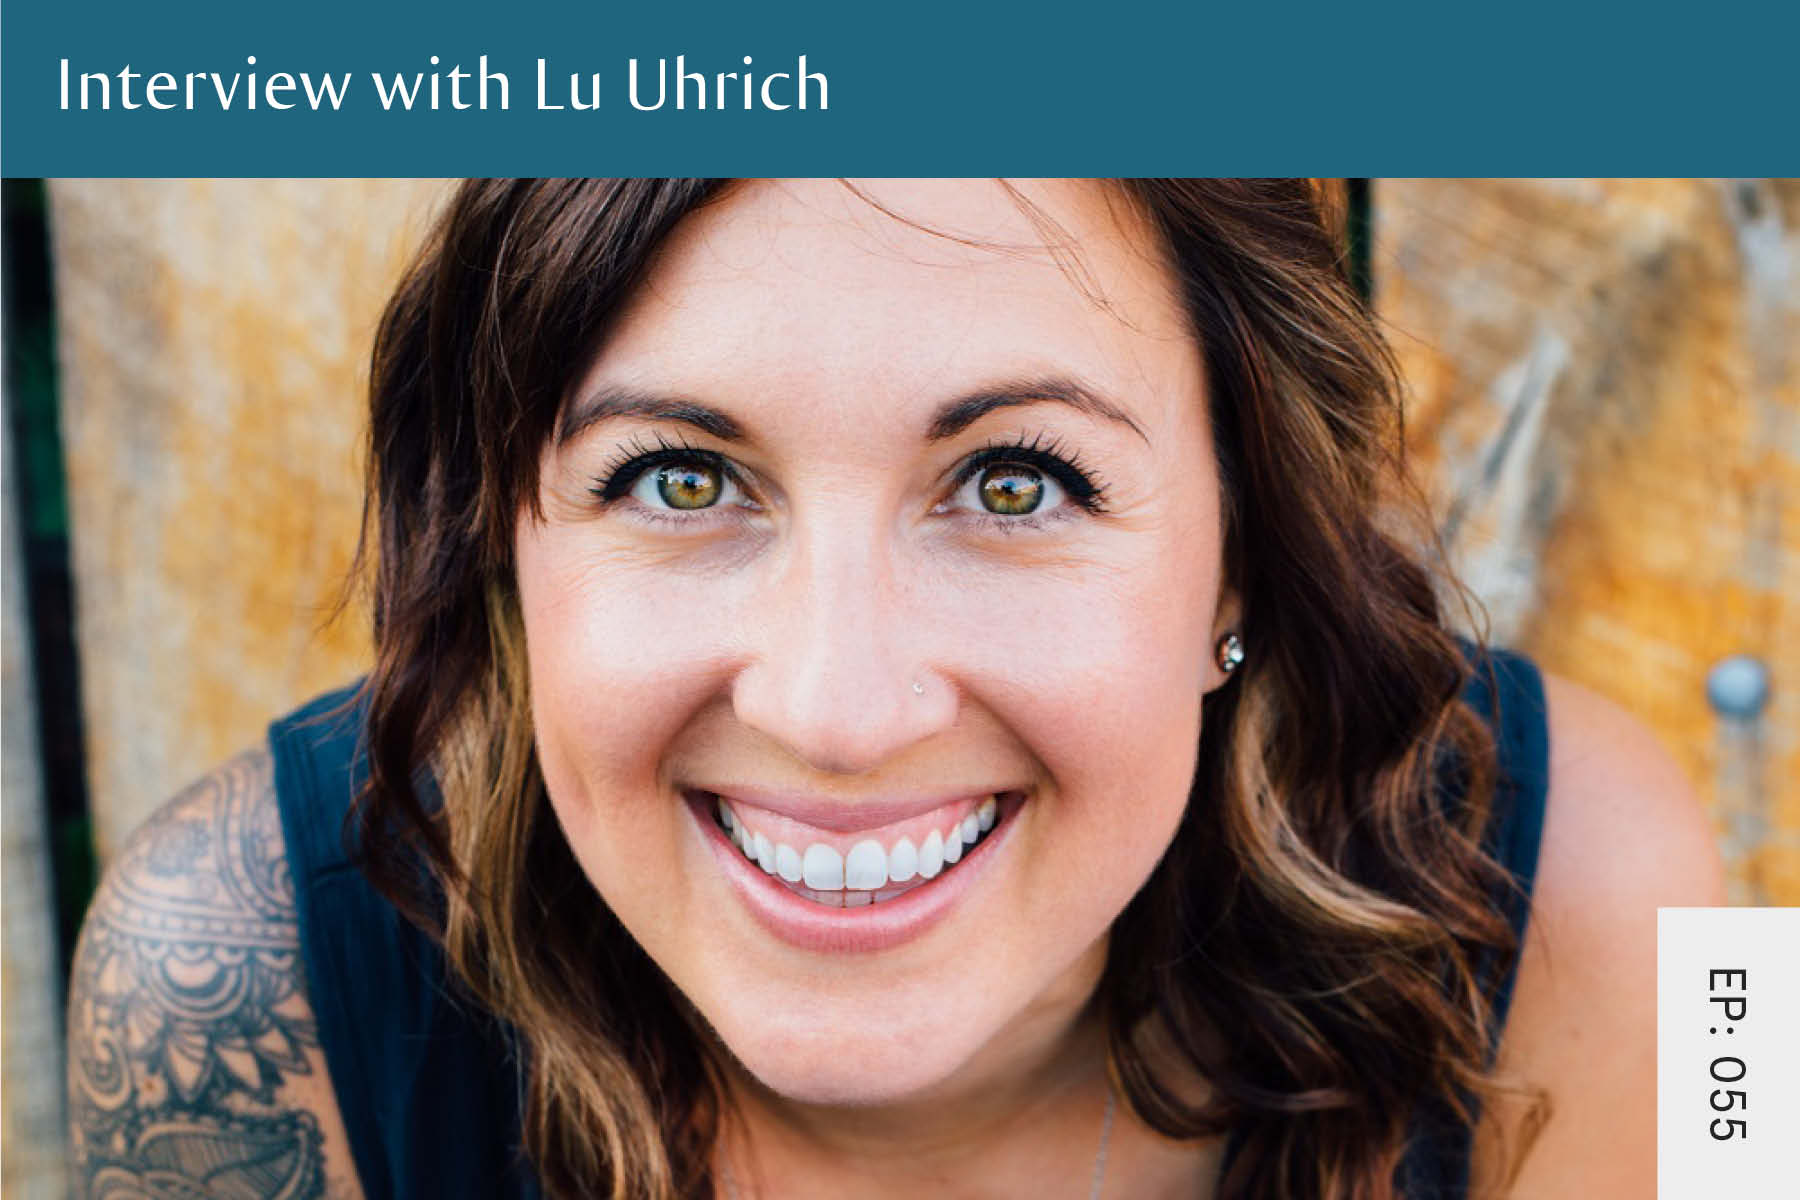 055: Interview with Lu Uhrich - Seven Health: Eating Disorder Recovery and Anti Diet Nutritionist